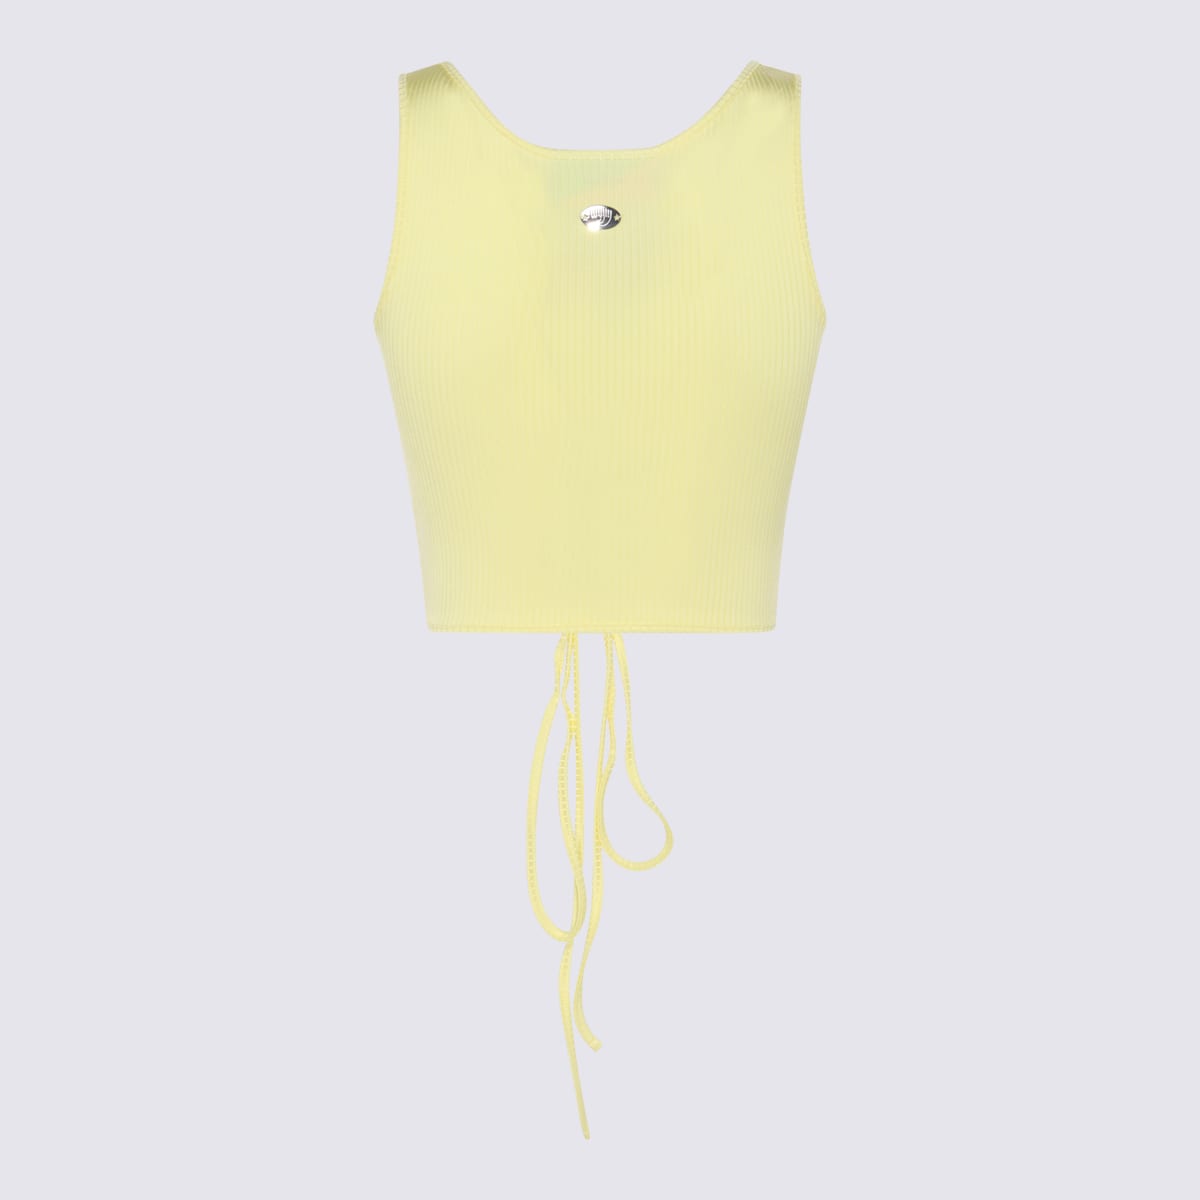 Wax Yellow Cotton Stretch Top